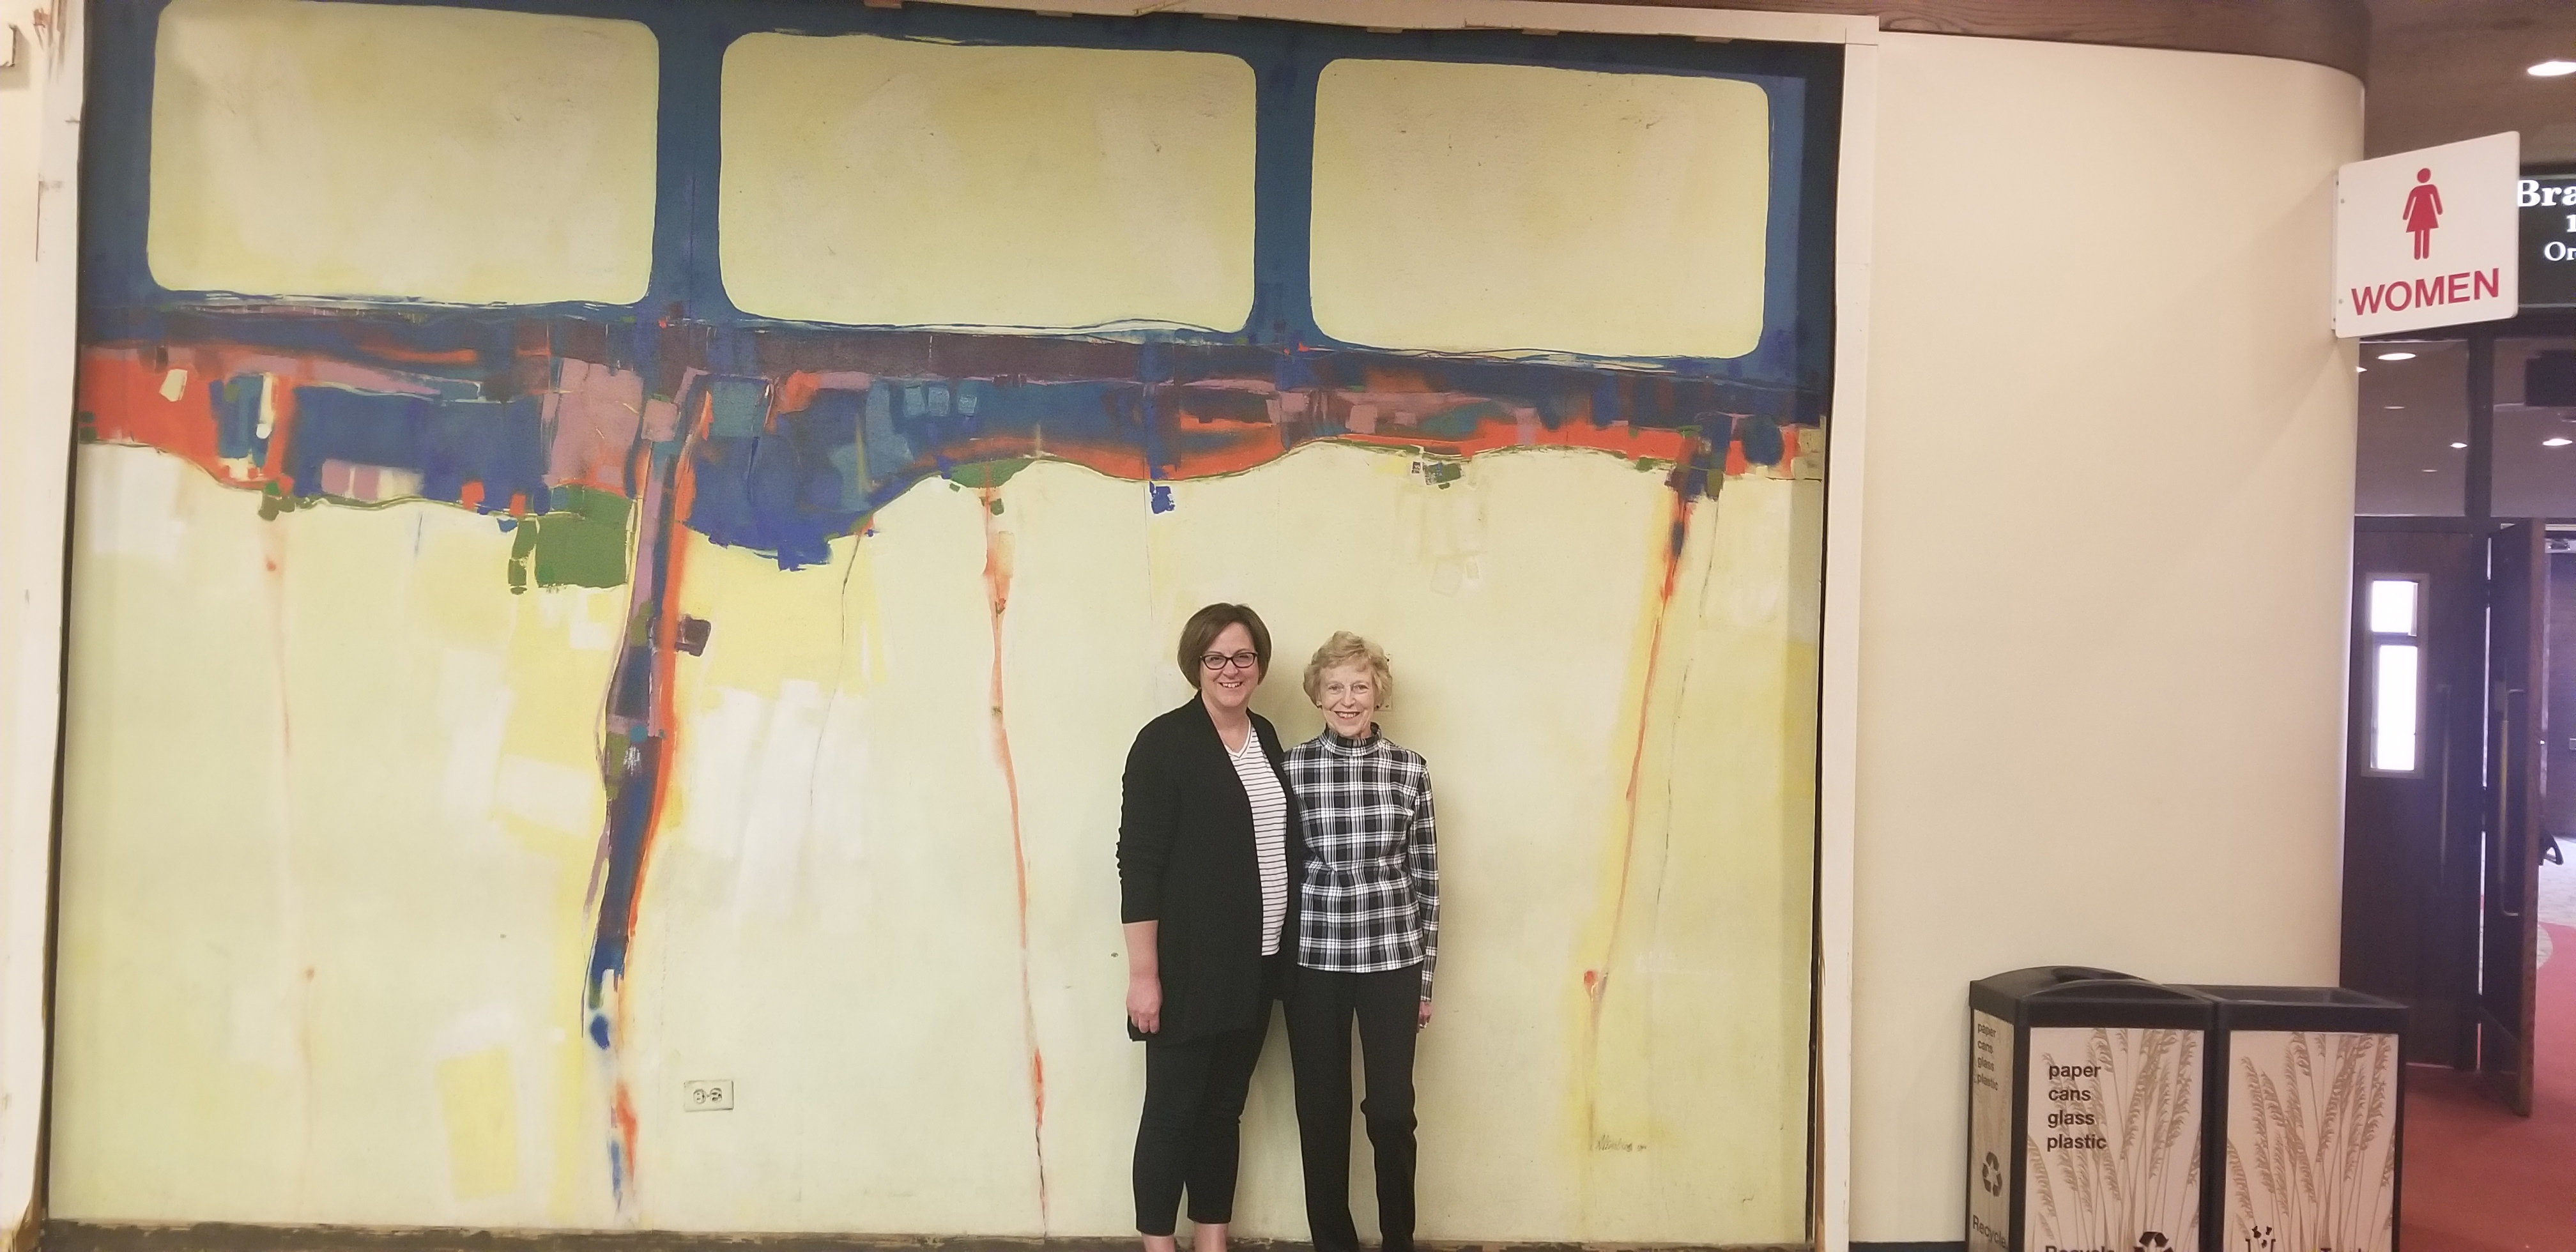 Assistant Professor Jennifer Peterson and her mother, Joan Steinburg, stand before the mural May 23. (Photograph courtesy of Bill Legett)